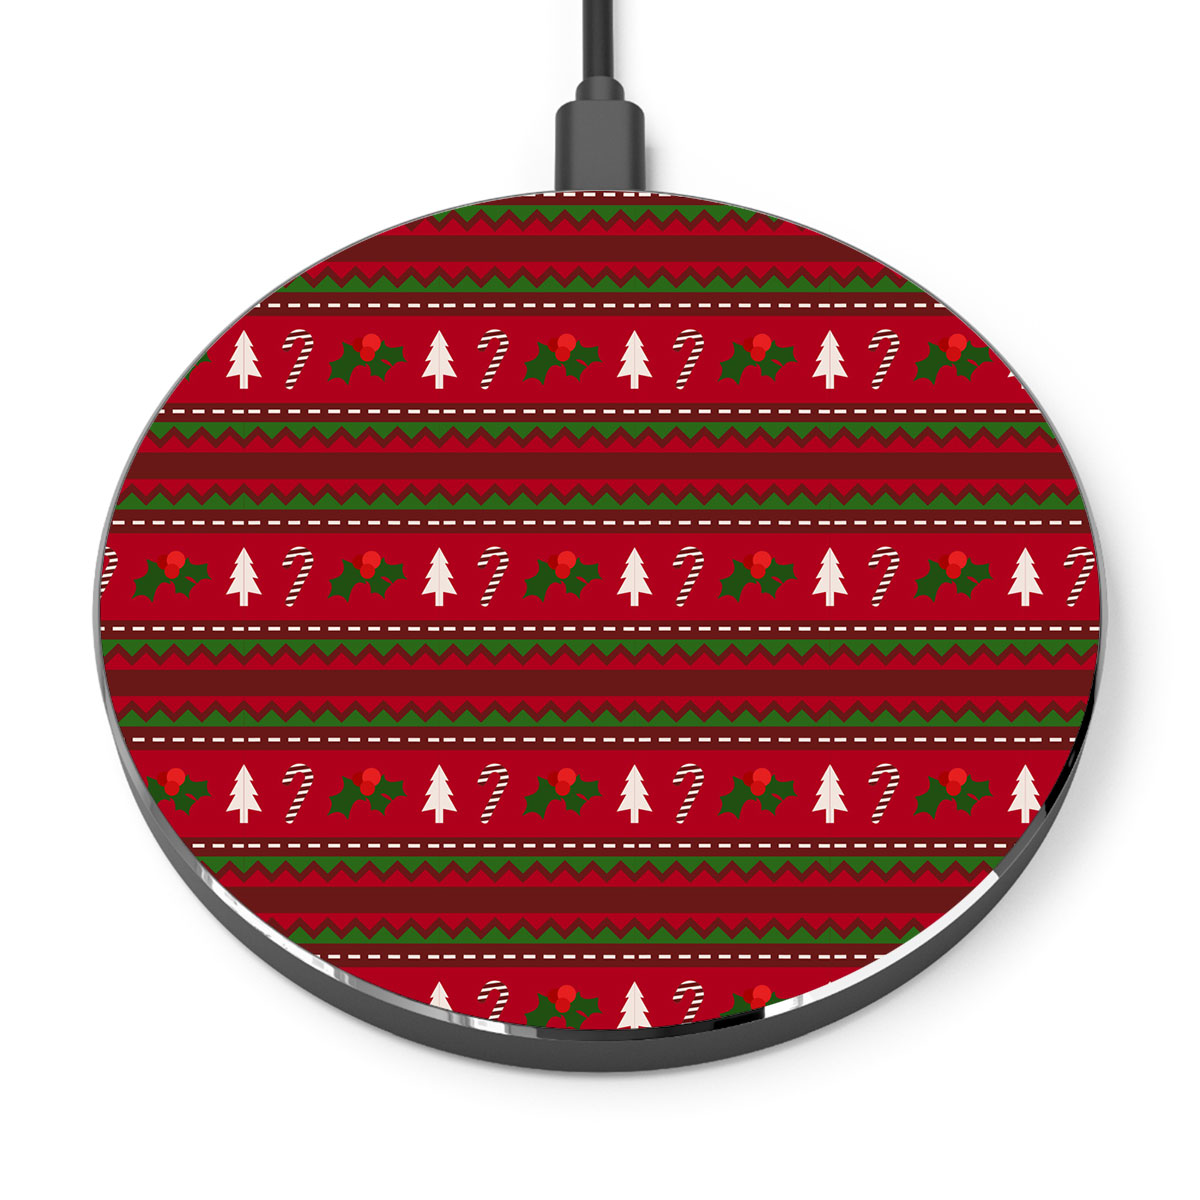 Red Green And White Christmas Tree, Holly Leaf With Candy Cane.jpg Printed Wireless Charger